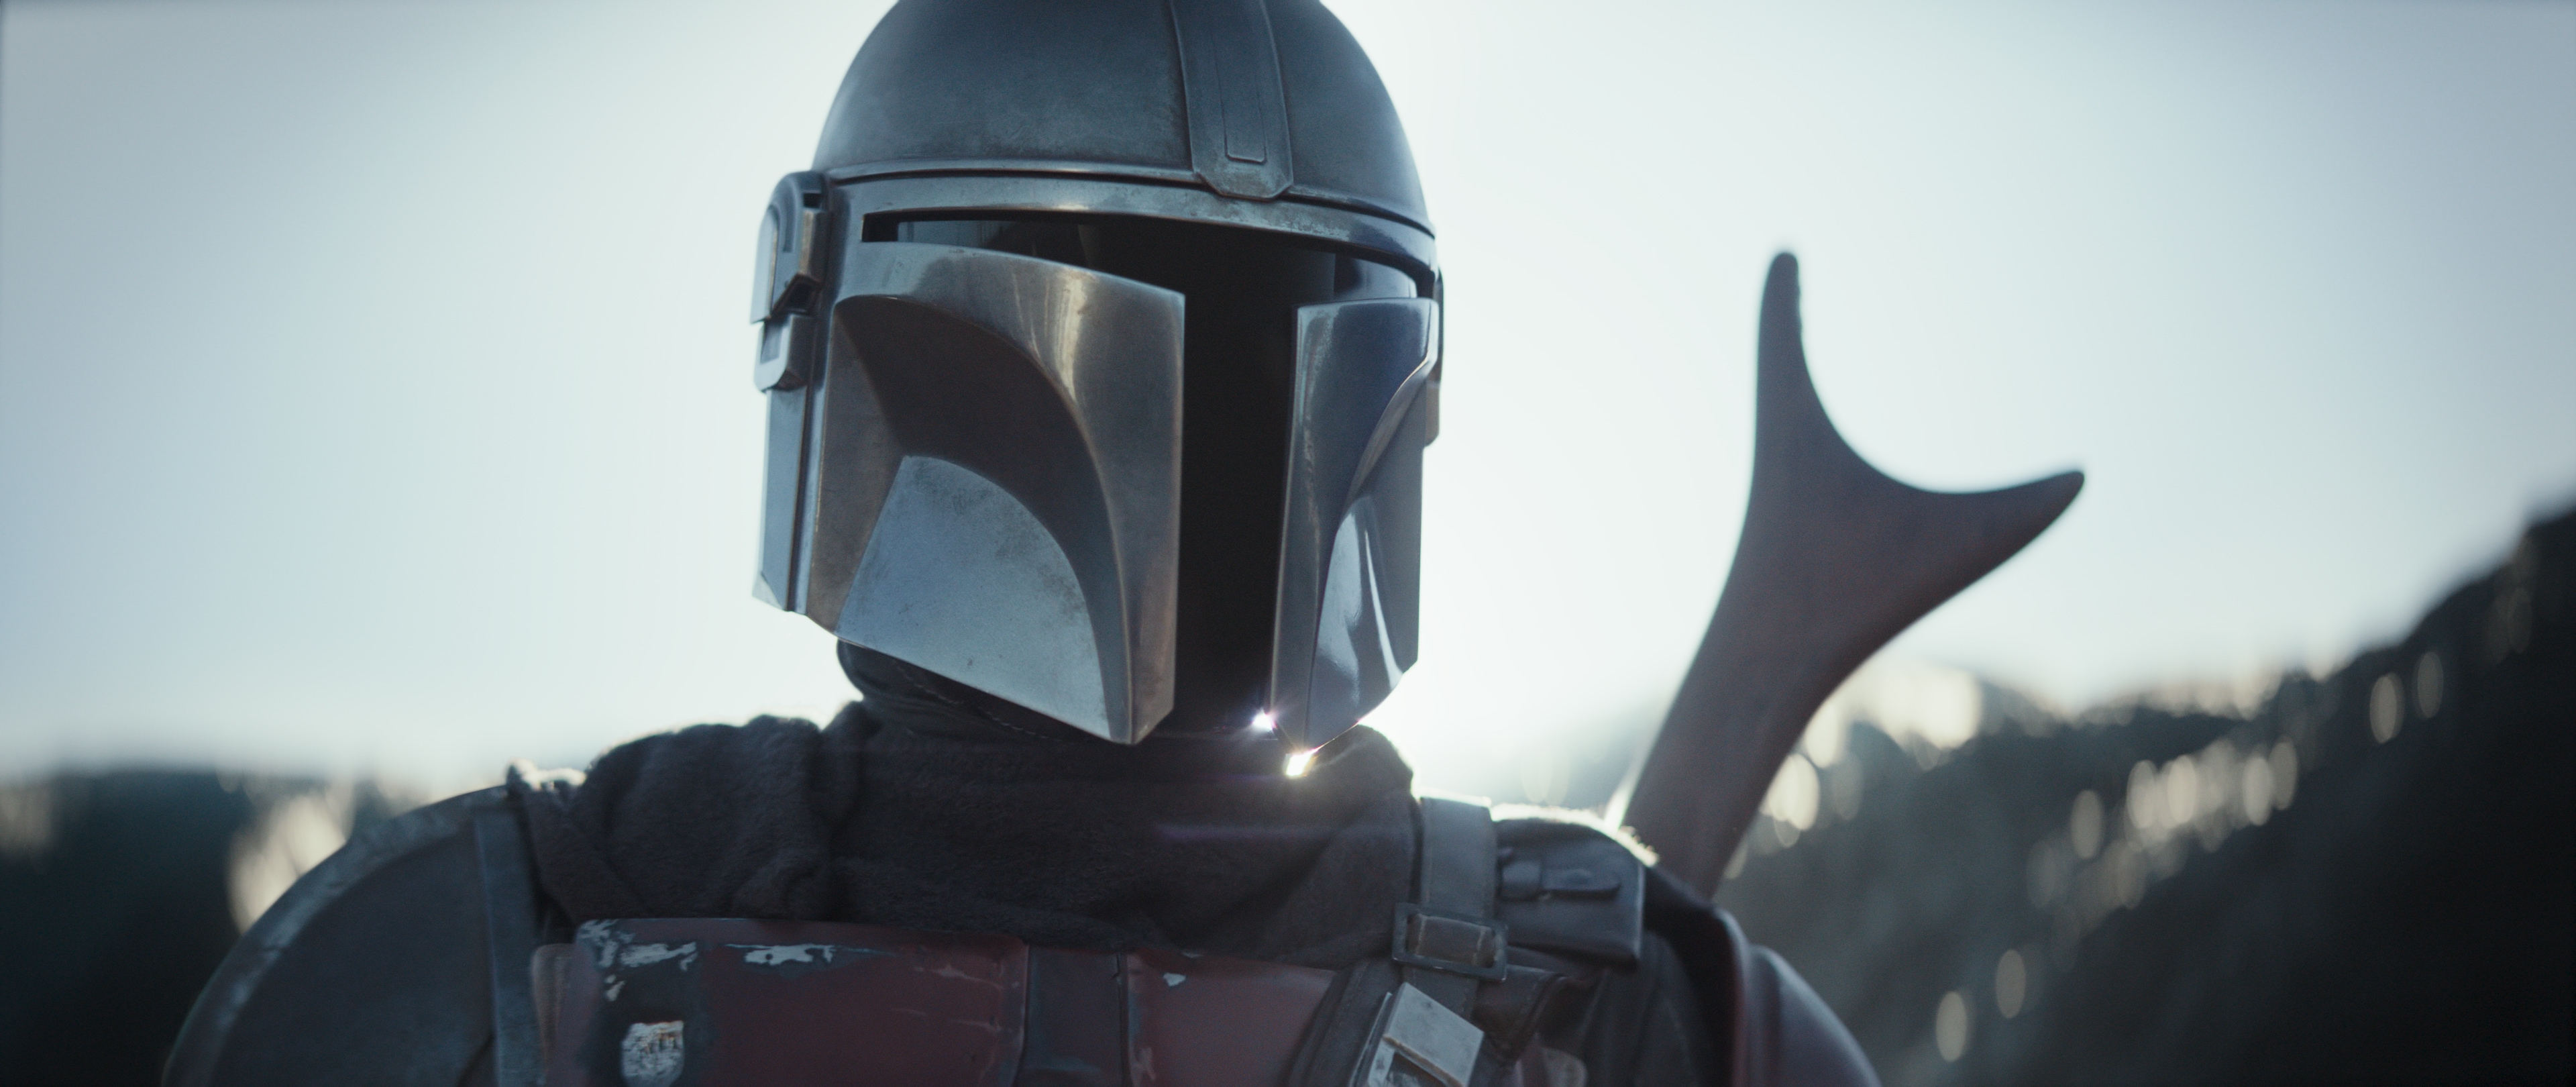 the mandalorian in tight close-up with a shiny helmet and gun sticking out of frame